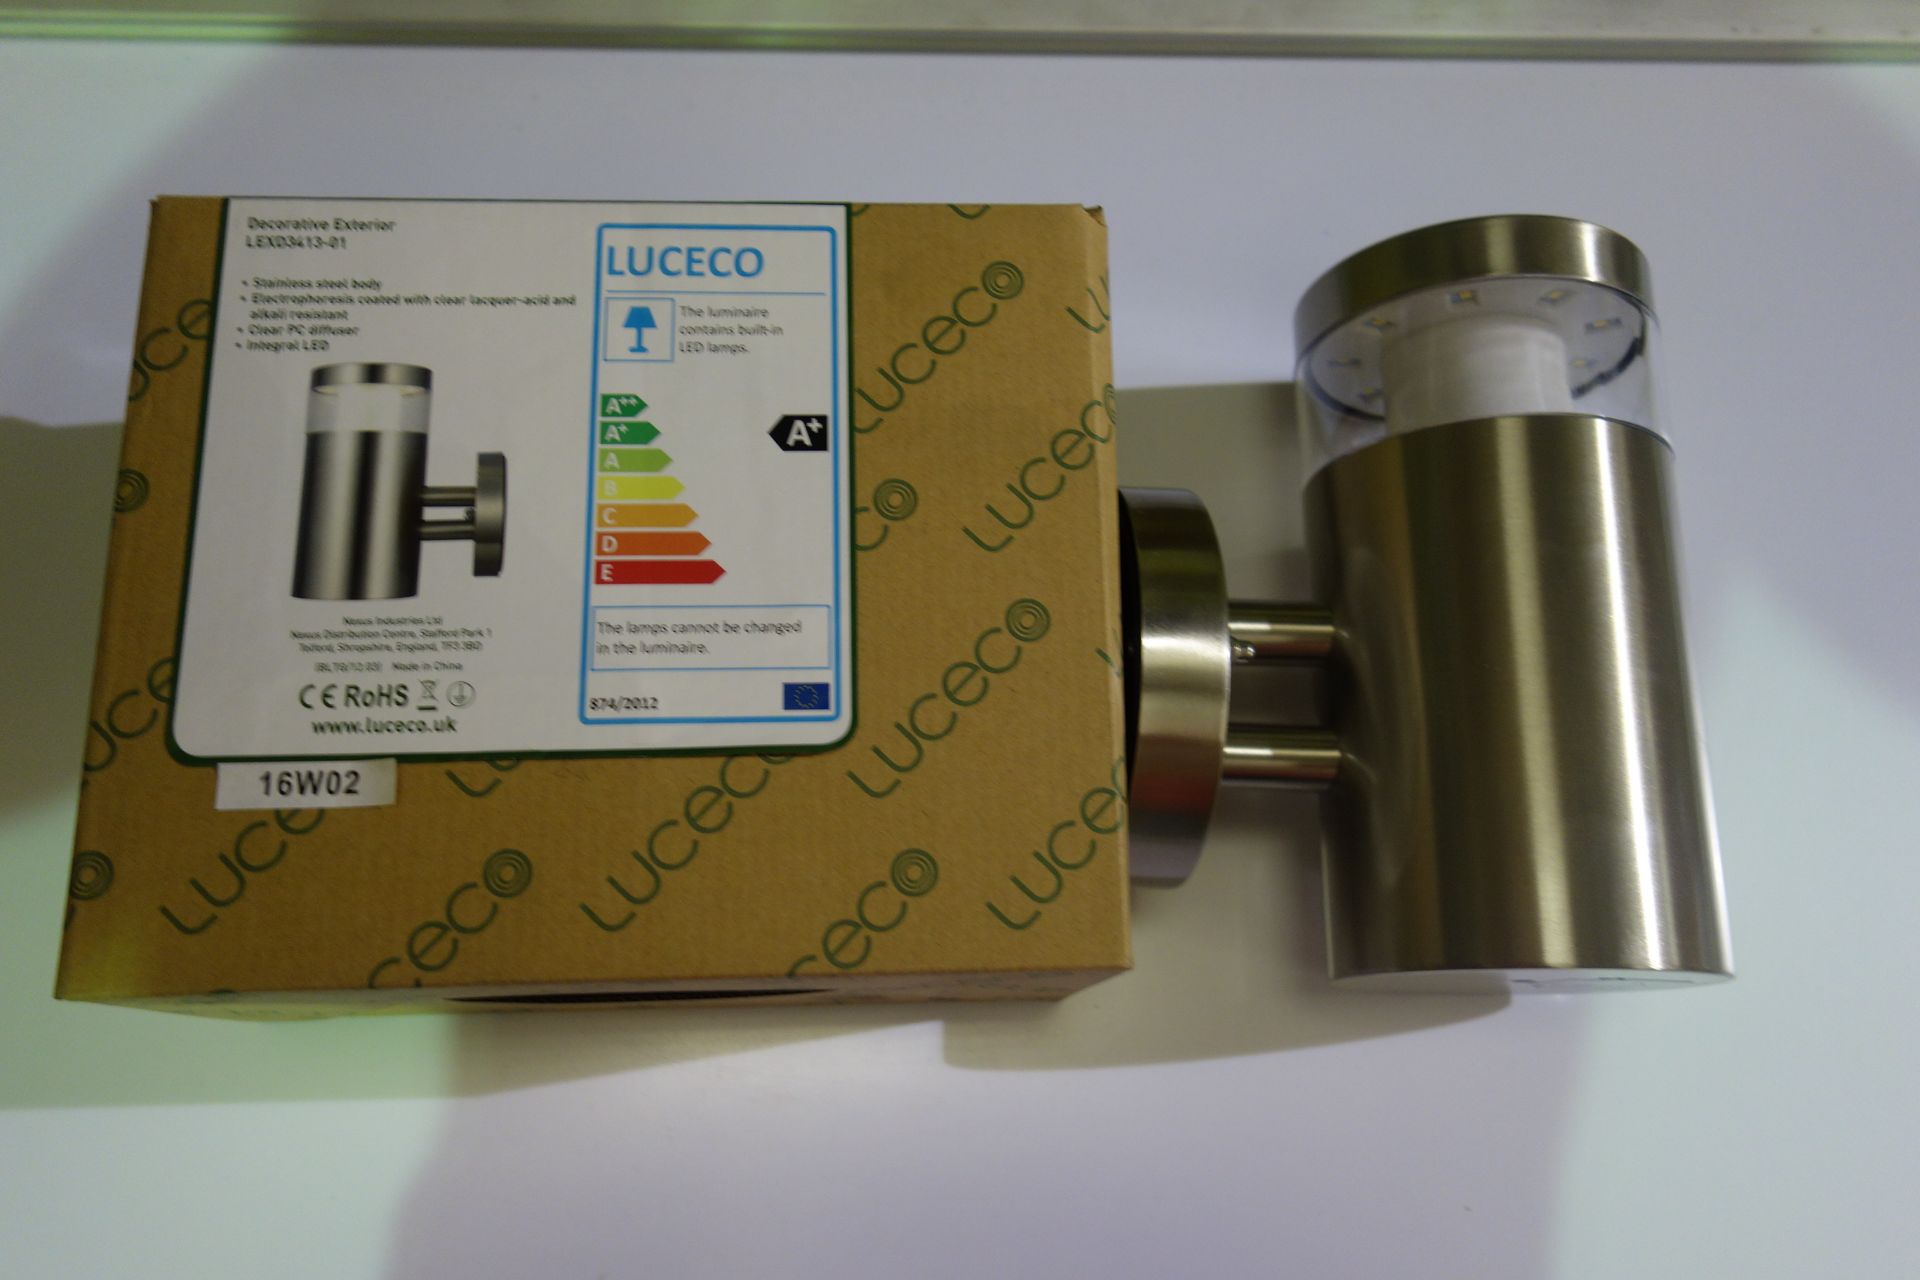 12 X Luceco LEXD3413-01 Decorative LED Exterior Light Fitting Stainless Steel Body Acid + Alkali